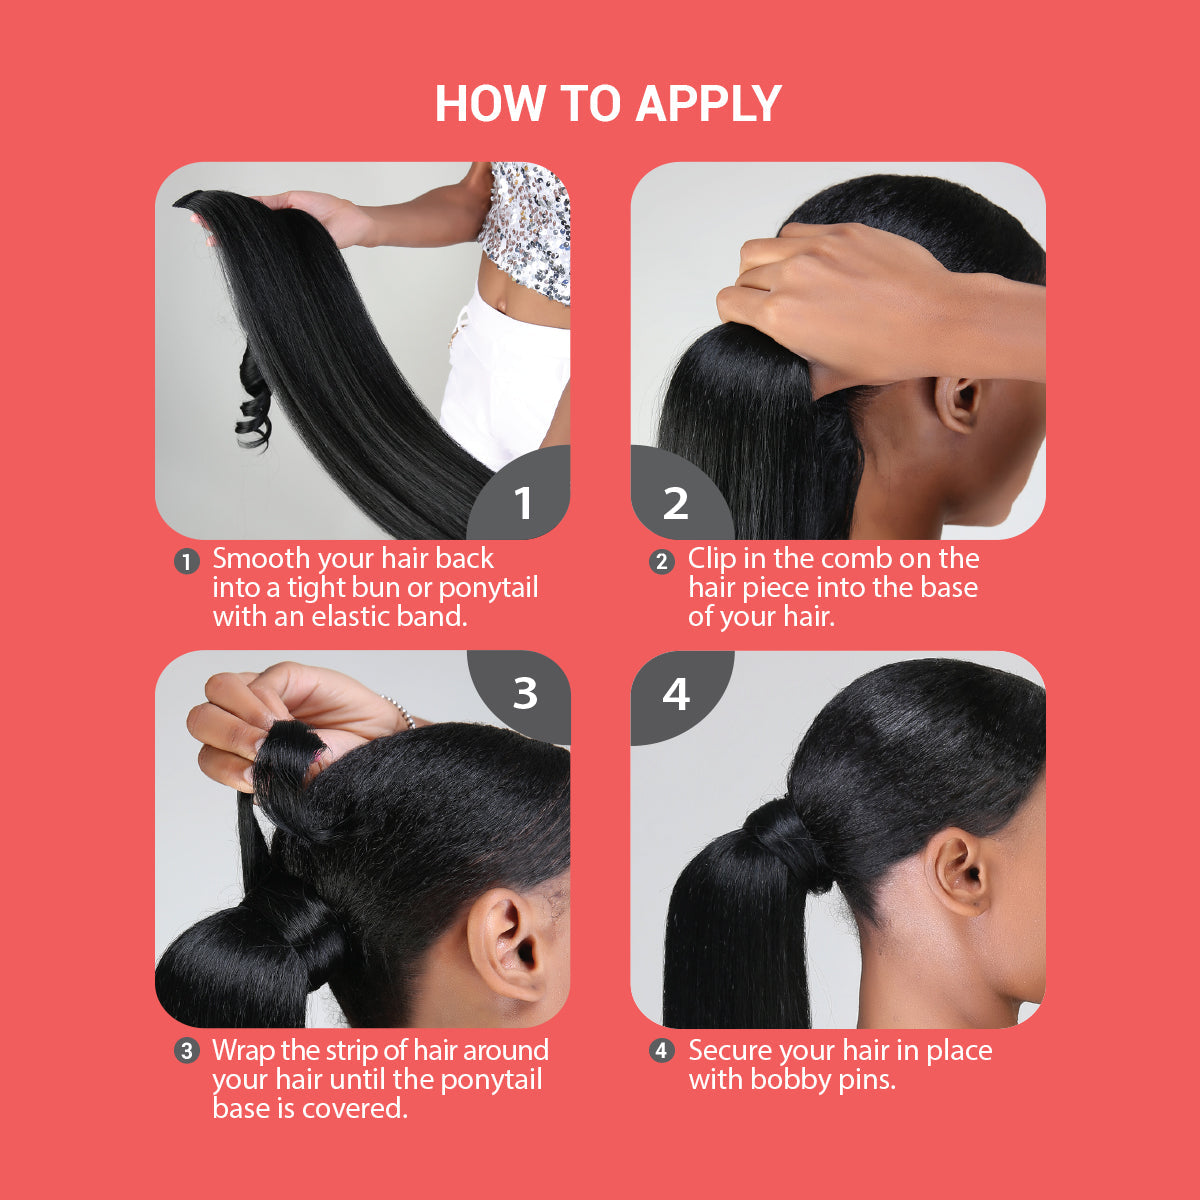 how to apply ponytail, how to apply braided ponytail, smooth your hair back into a tight bun or ponytail with an elastic band. Clip in the comb on the hair piece into the base of your hair. Wrap the strip of hair around your hair until the ponytail base is covered. Secure your hair in place with bobby pins.